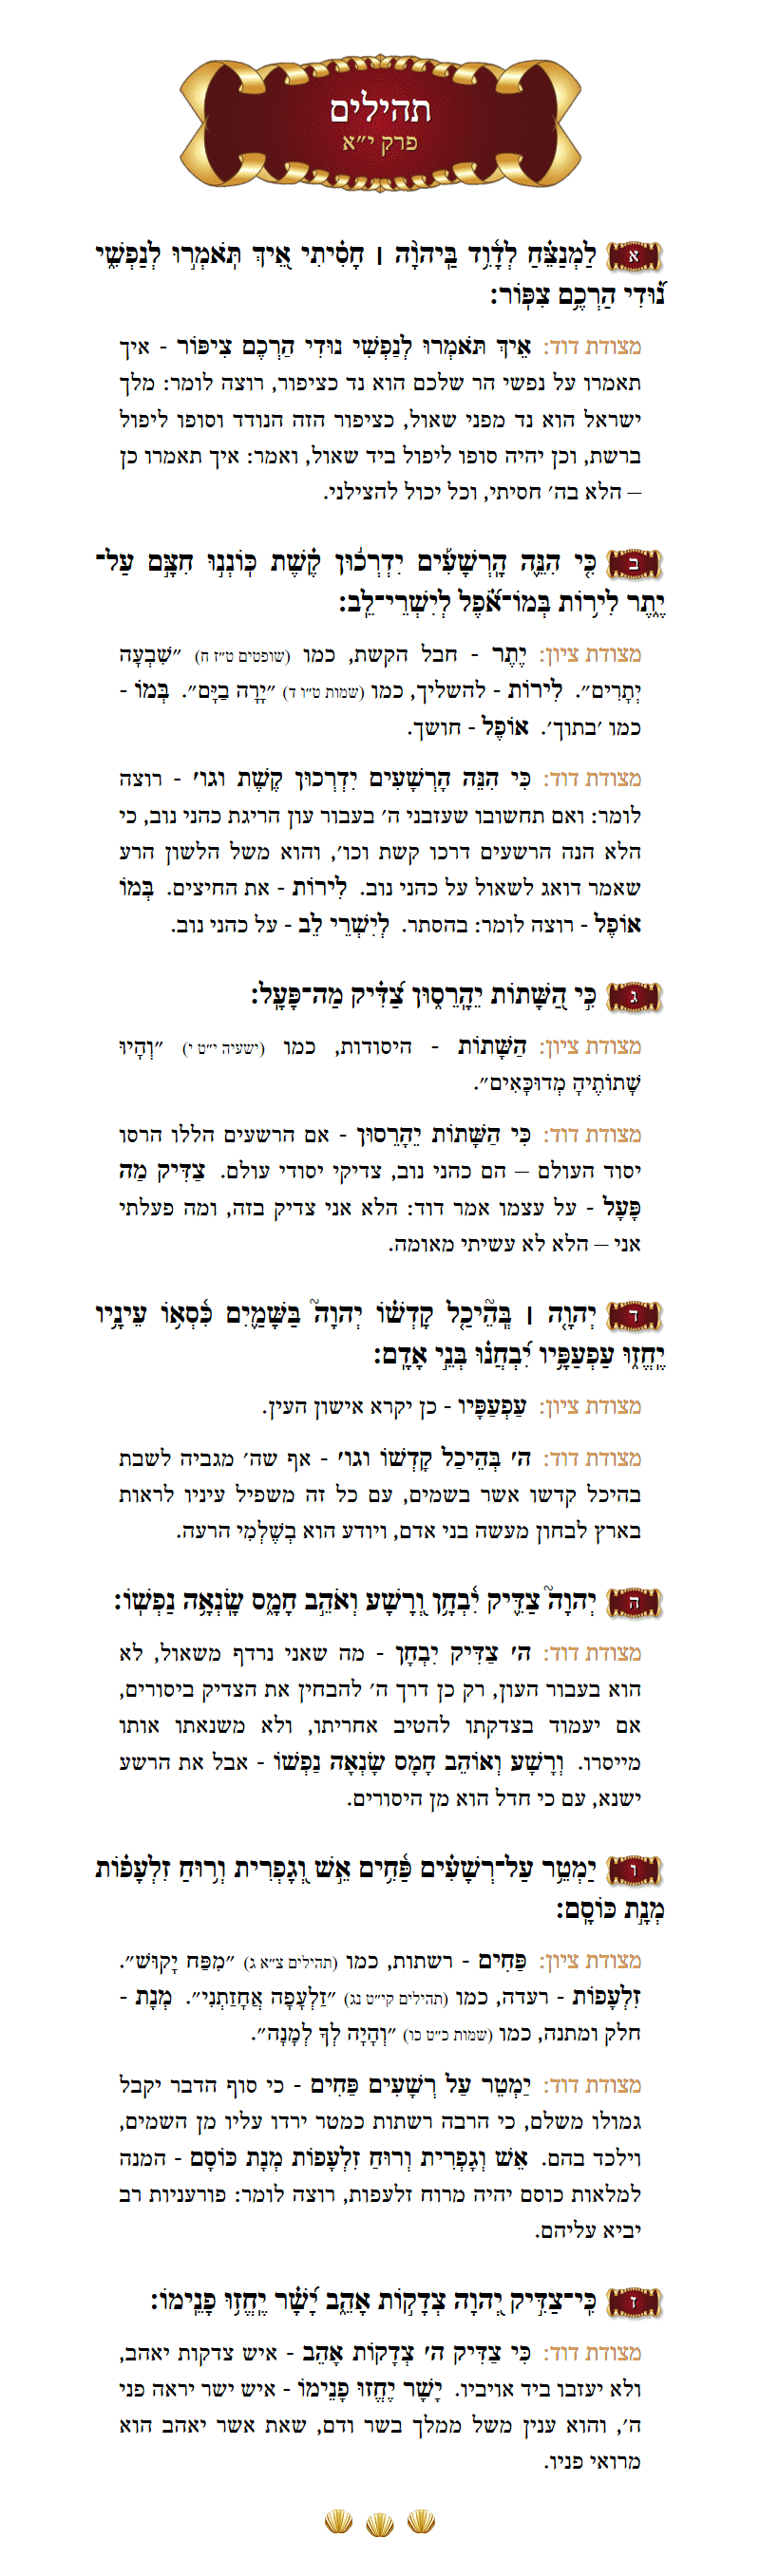 Sefer Tehillim Chapter 11 with commentary